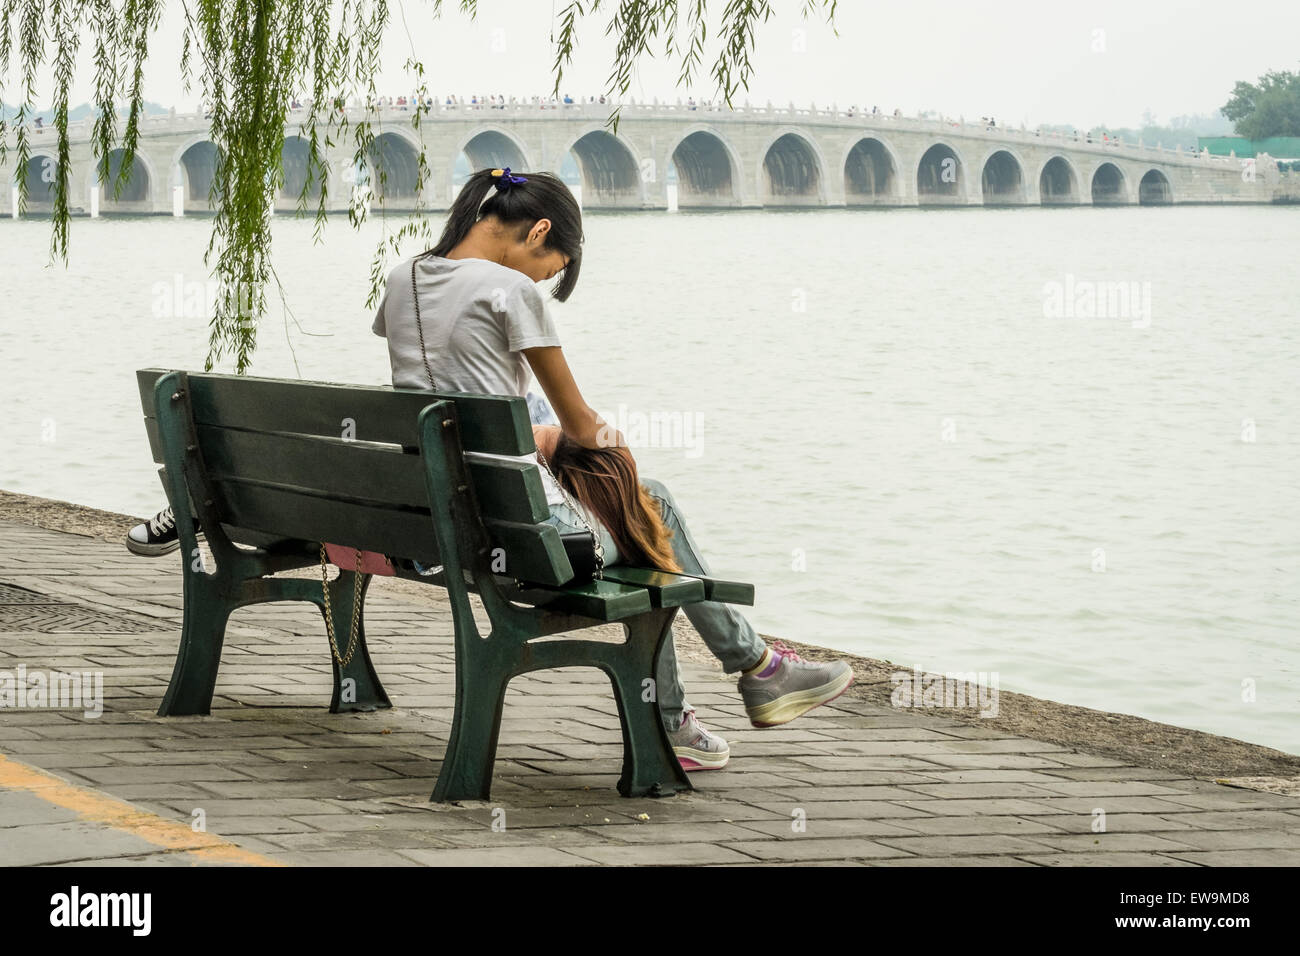 Two girls on a bench with the amazing 17 Arch Bridge in the background at Kunming Lake, Beijing, China Stock Photo